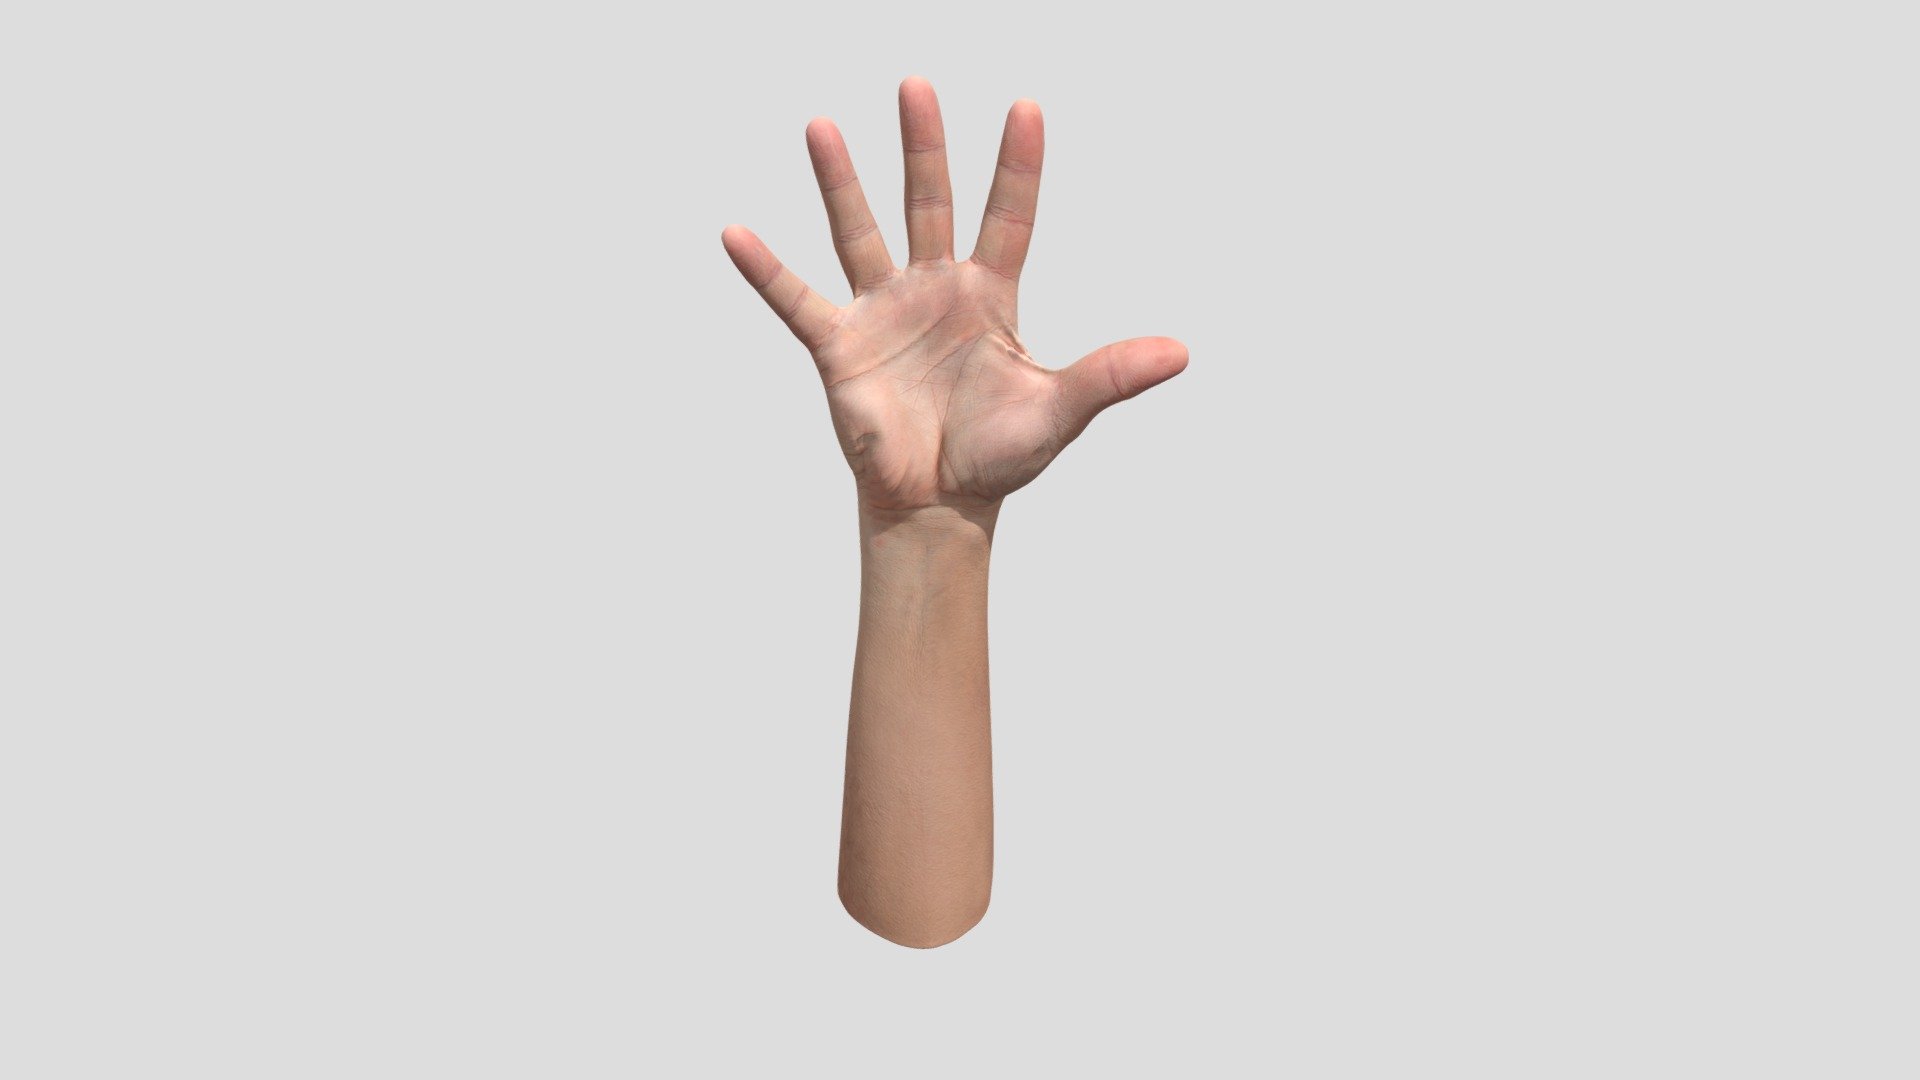 We would like to introduce you to one of the many retopologized hands that offers precise retopology.This hand is perfect for anyone looking for a realistic and aesthetically crafted model for their projects. Find out how this collection can enrich your creative work and give it the visual punch it needs!

Ethnicity: White
Gender: Male
Age: 56
Height: 178 cm
Weight: 89 kg

NOTE: Retopologized scan with postproduction.

Technical Specifications:

1 x OBJ. File / 19 600 polys
2 x 8K PNG Texture - Diffuse, Normal

3Dsk provides all you need from virtual casting studio. Model casting, neutral &amp; morph expression scans, full body scans, accessories and cloth scans, 3D postproduction, photoshooting of full body, portrait, hair, eyes and skin &amp; other on demand services 3d model